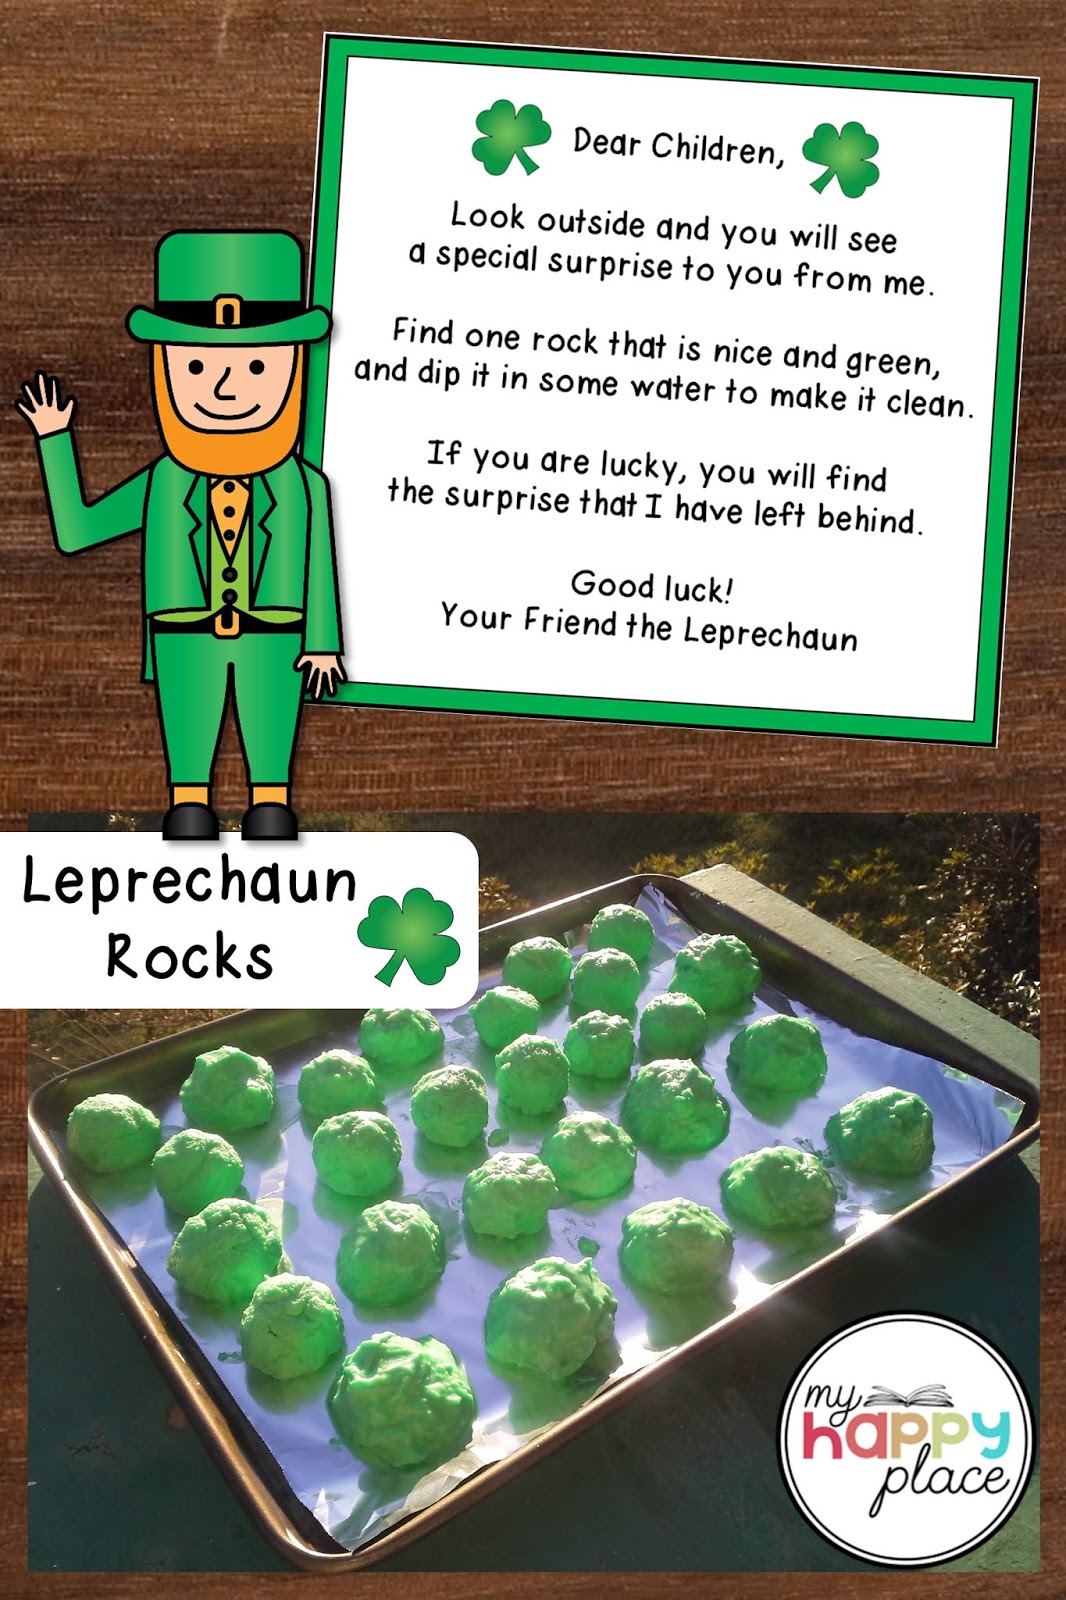 My Happy Place Teaching: Simple and Engaging Leprechaun Traps in the